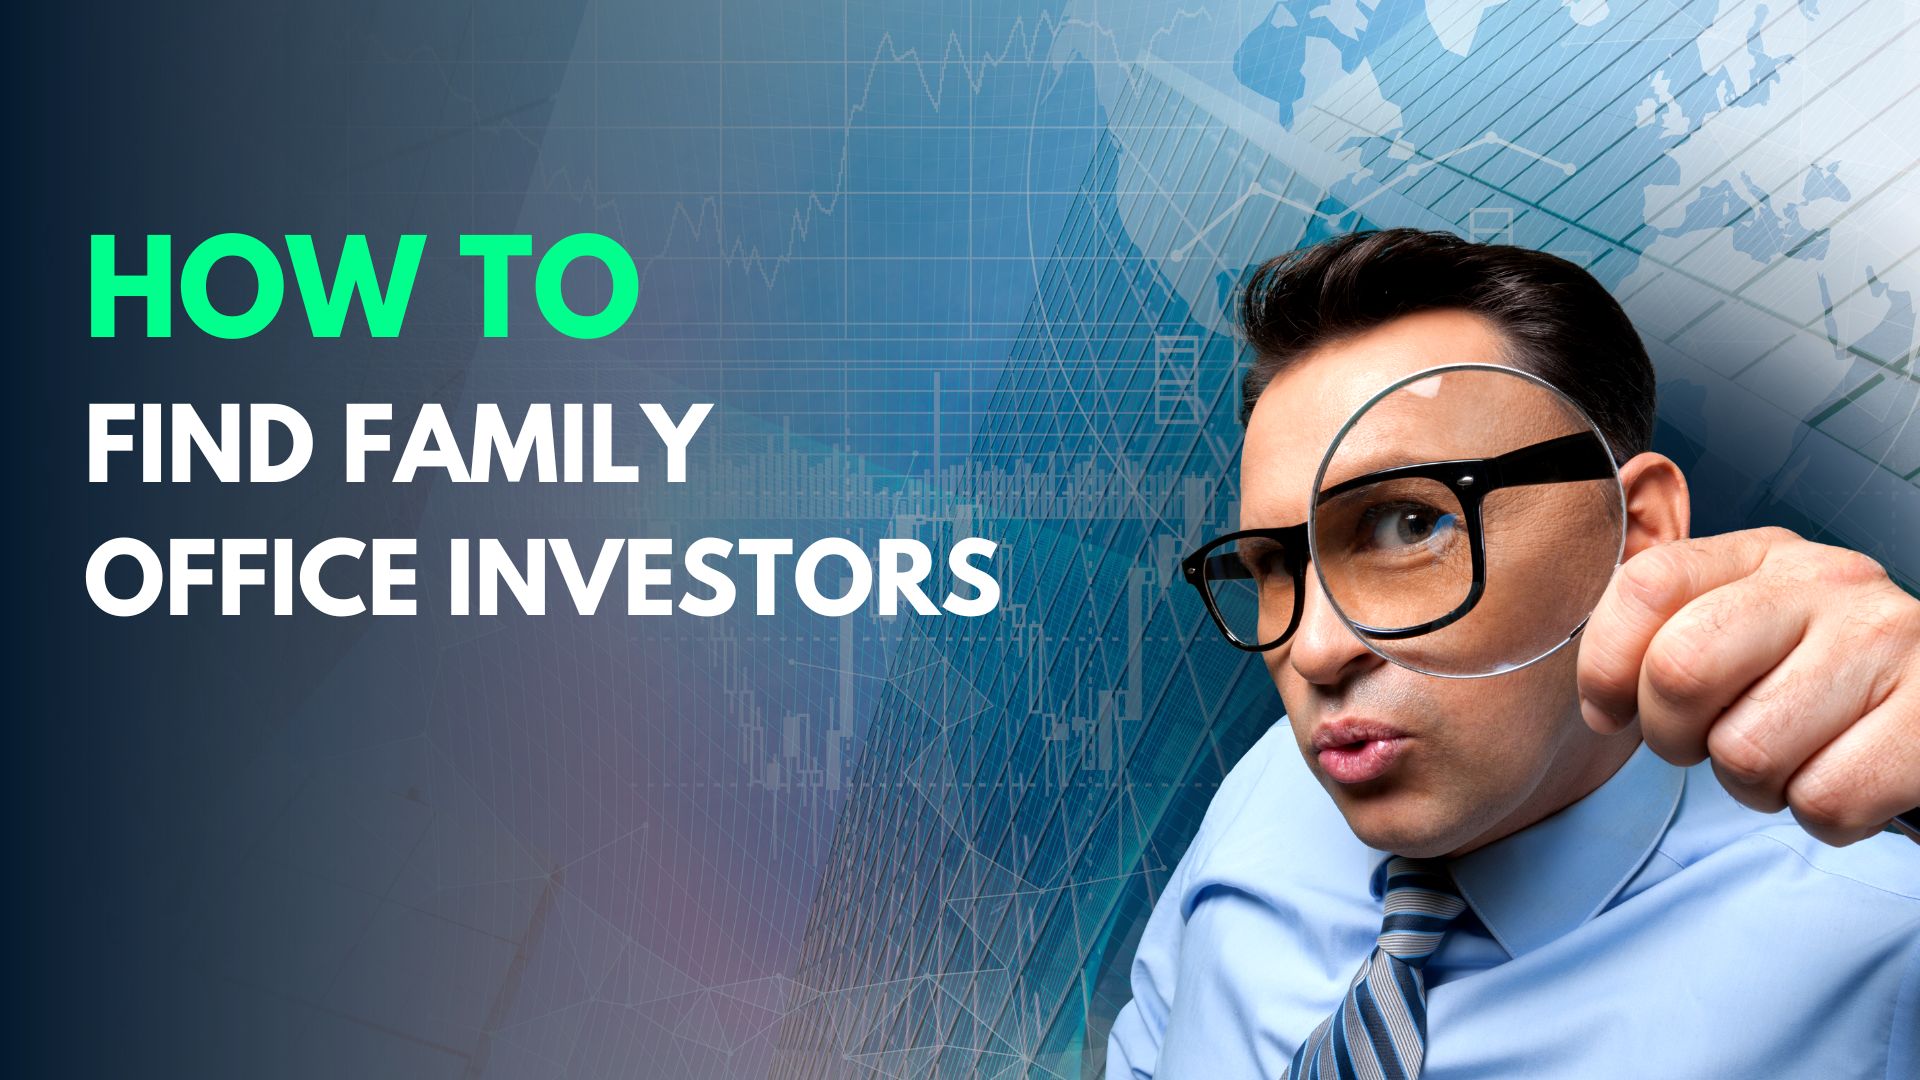 How to Find Family Office Investors